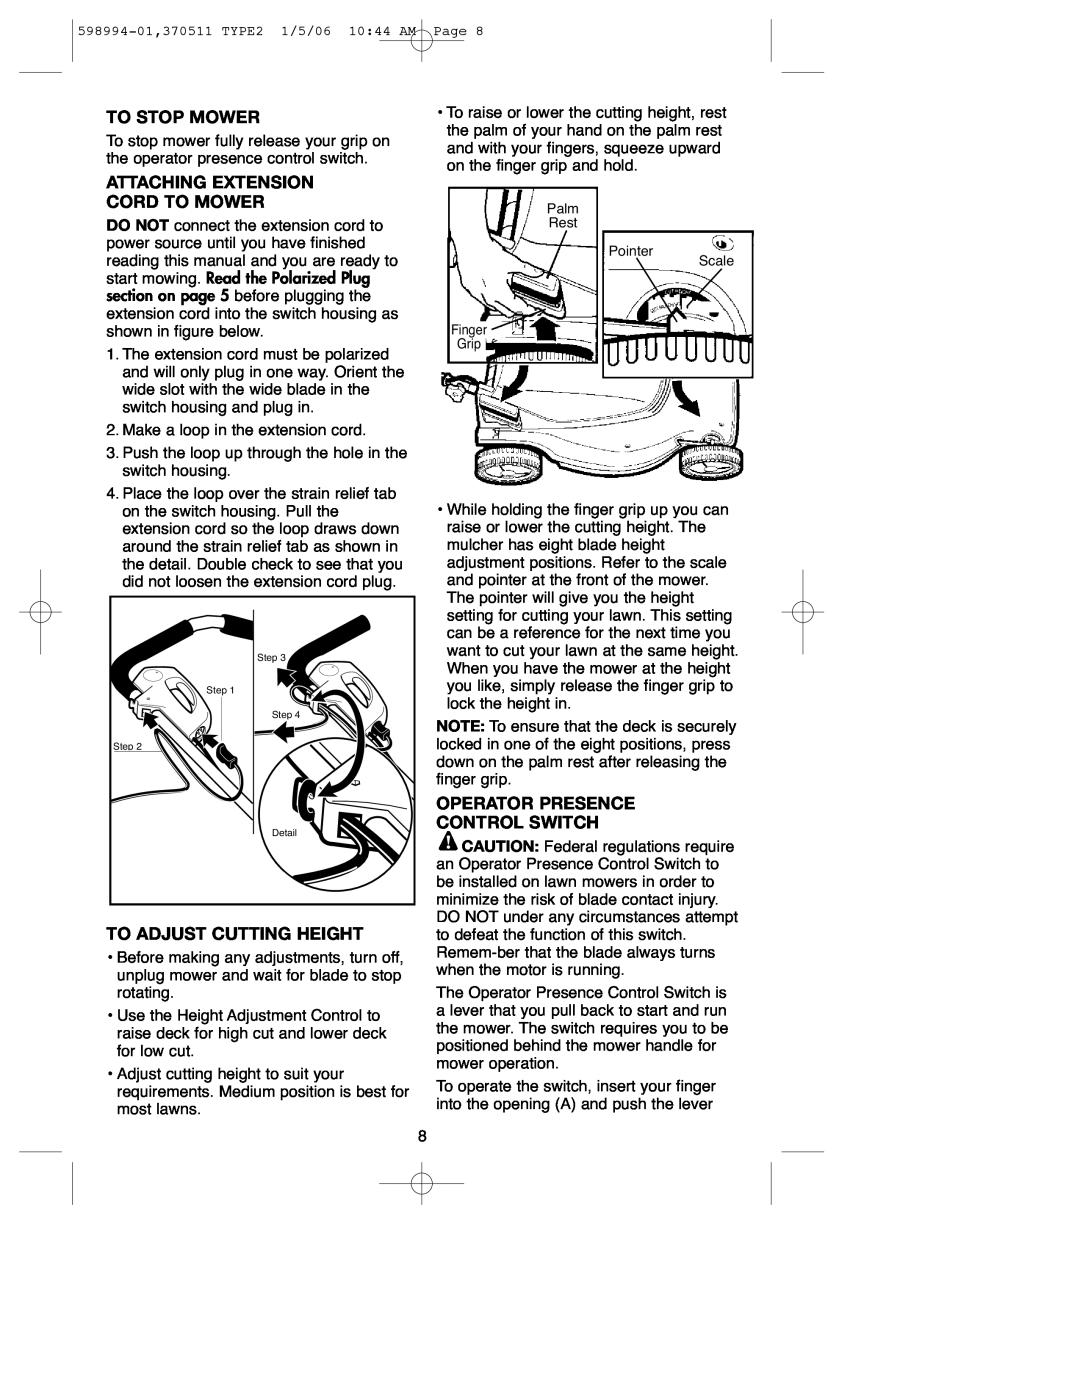 DeWalt 900.370511 instruction manual To Stop Mower, Attaching Extension Cord To Mower, To Adjust Cutting Height 